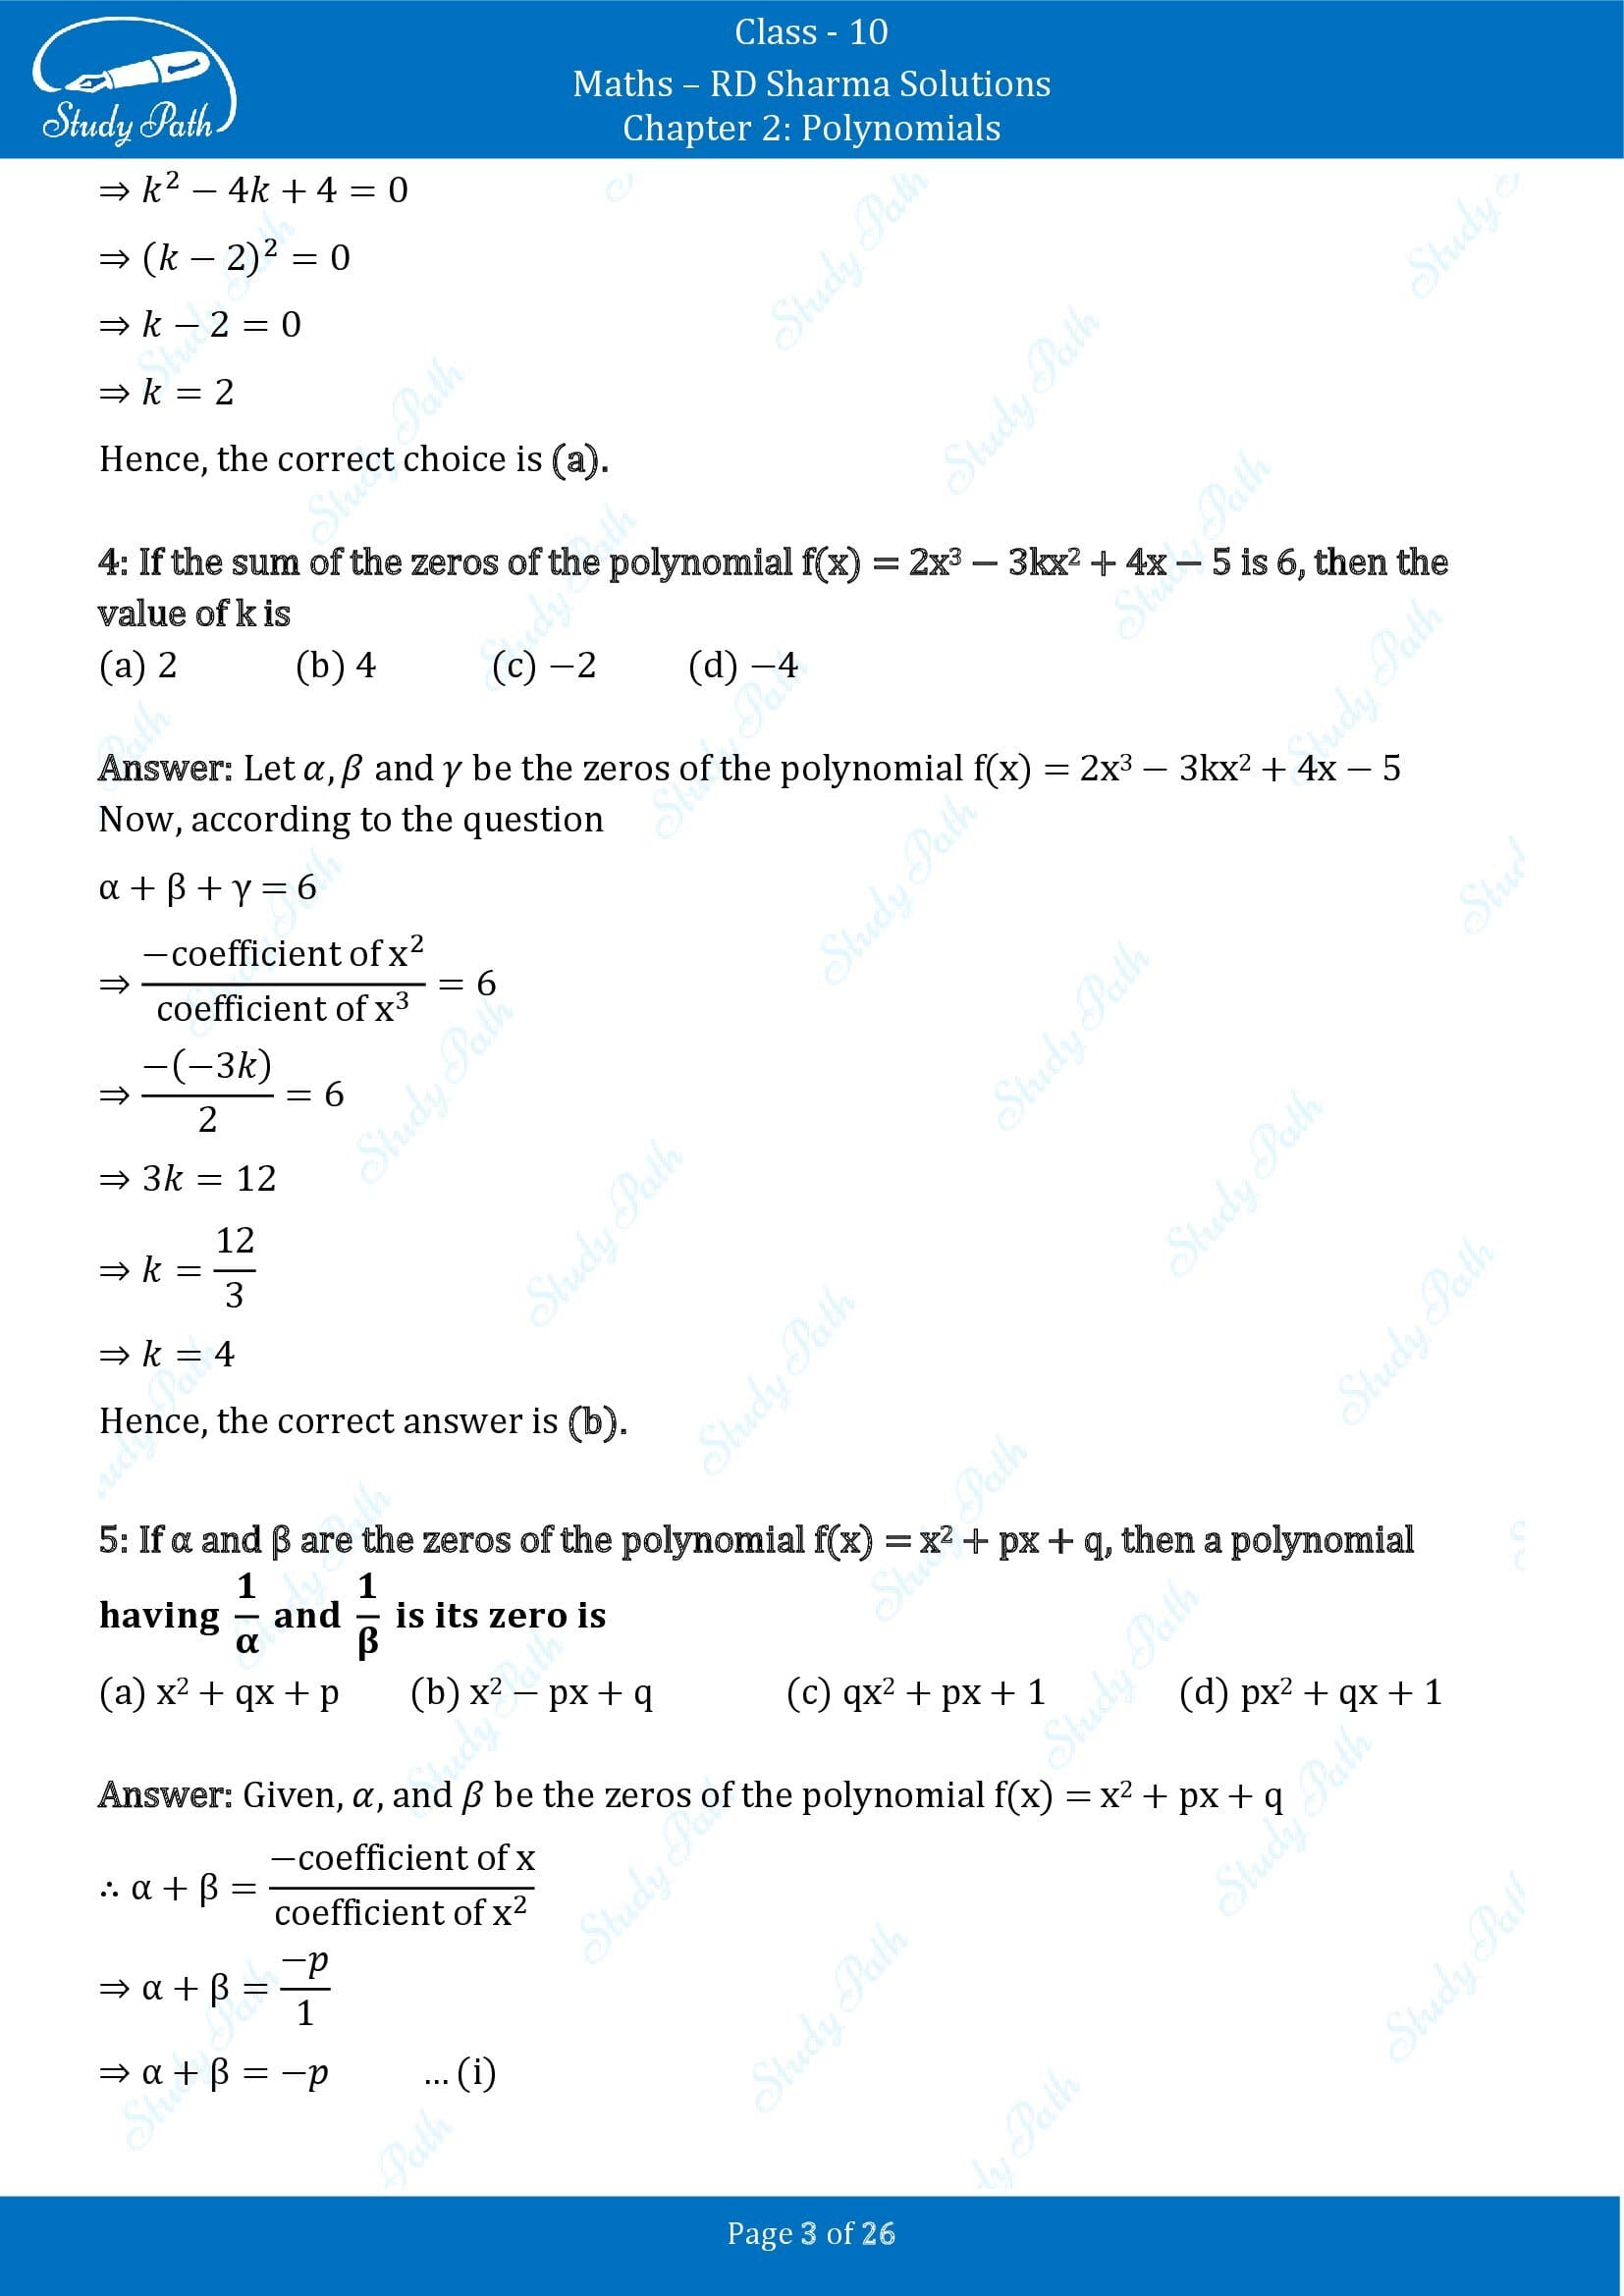 RD Sharma Solutions Class 10 Chapter 2 Polynomials Multiple Choice Questions MCQs 00003